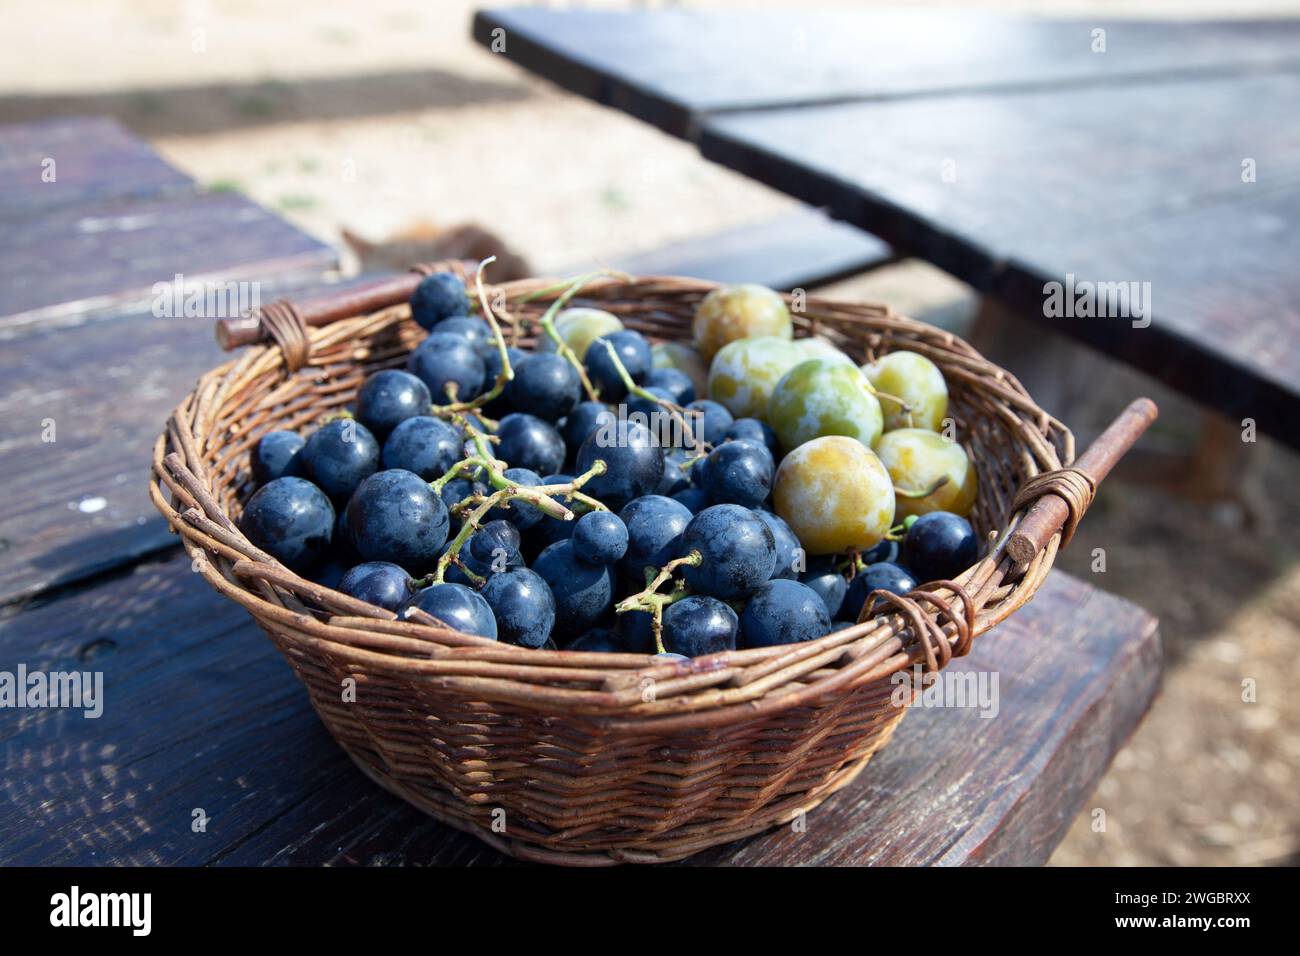 Close-up of a basket filled with black grapes and green plums Stock Photo